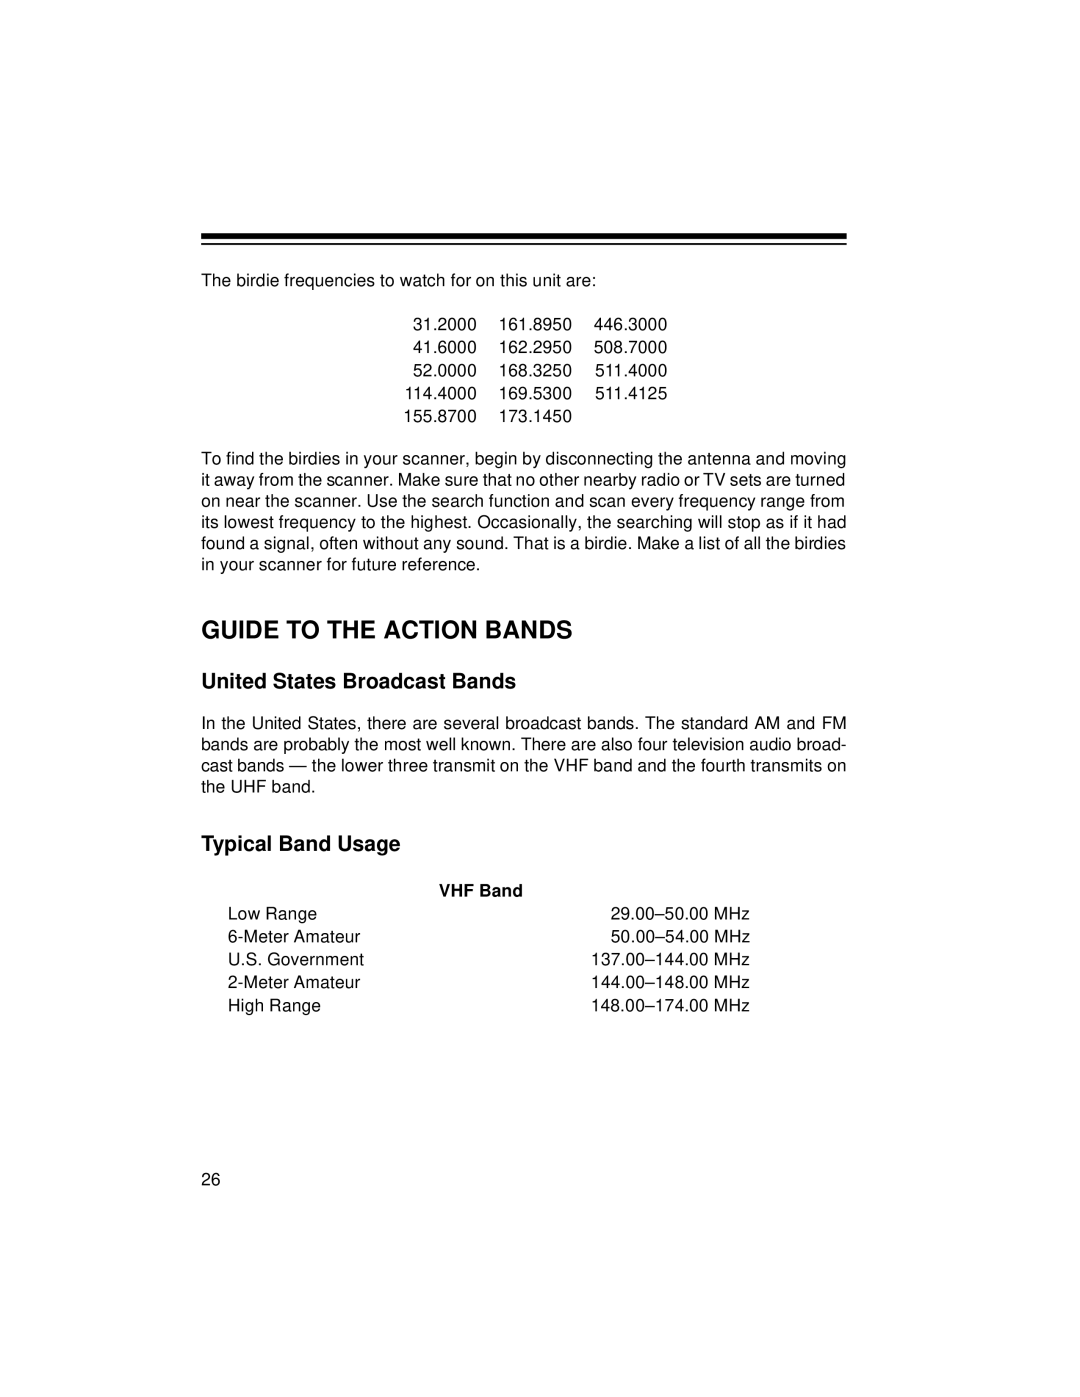 Radio Shack PRO-2056 owner manual Guide To The Action Bands, United States Broadcast Bands, Typical Band Usage 